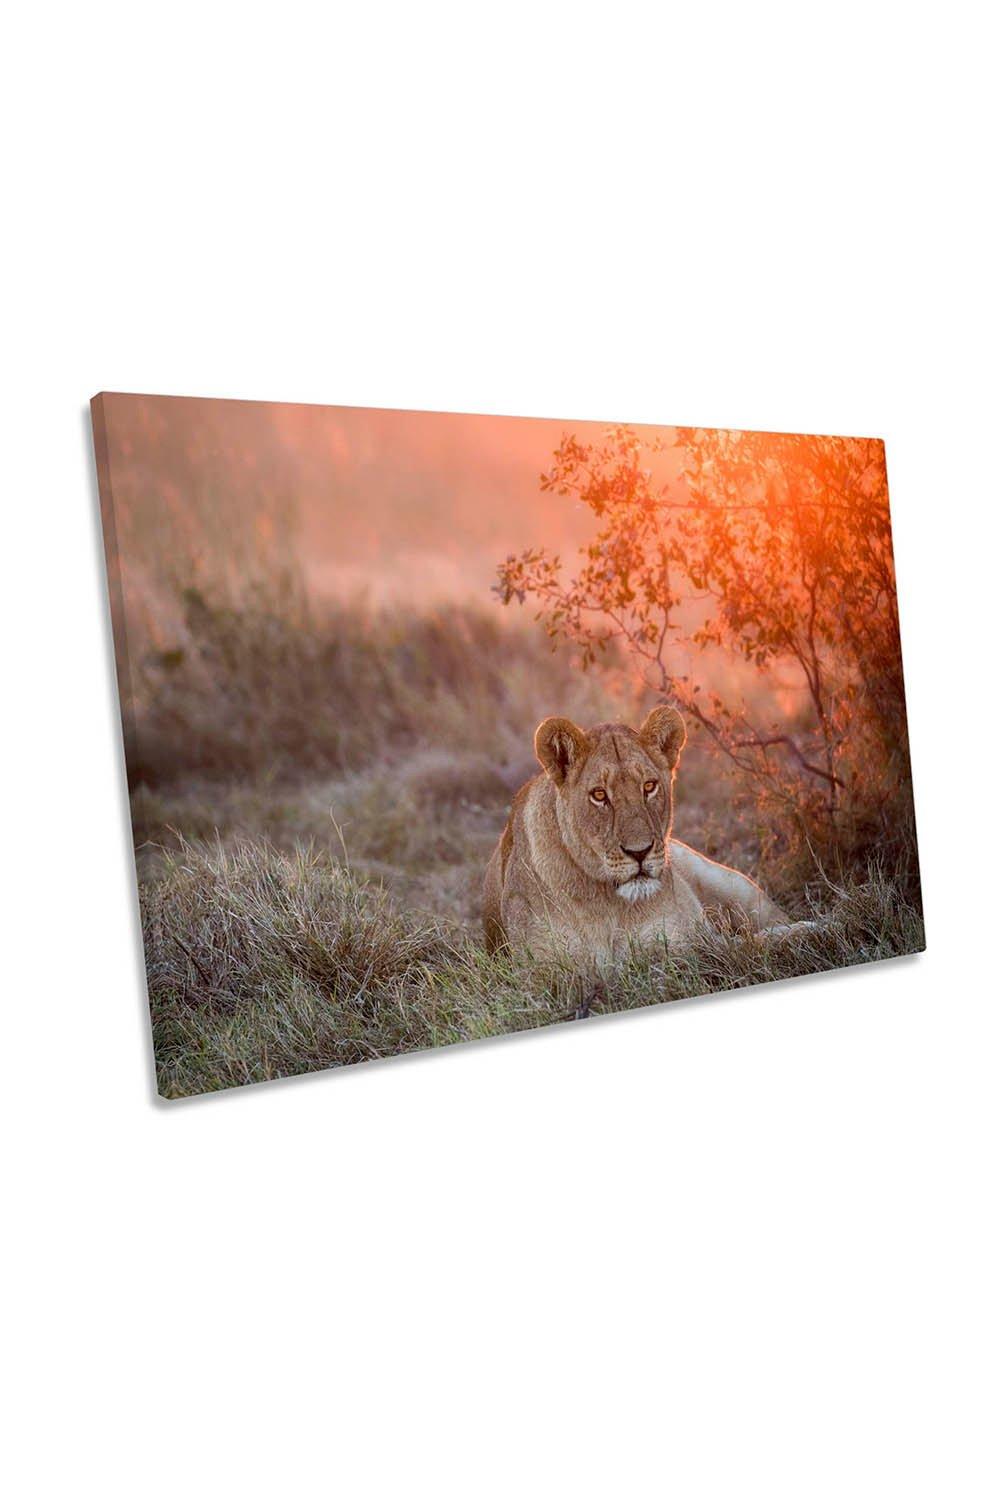 Sunset Queen Lion Wildlife Canvas Wall Art Picture Print